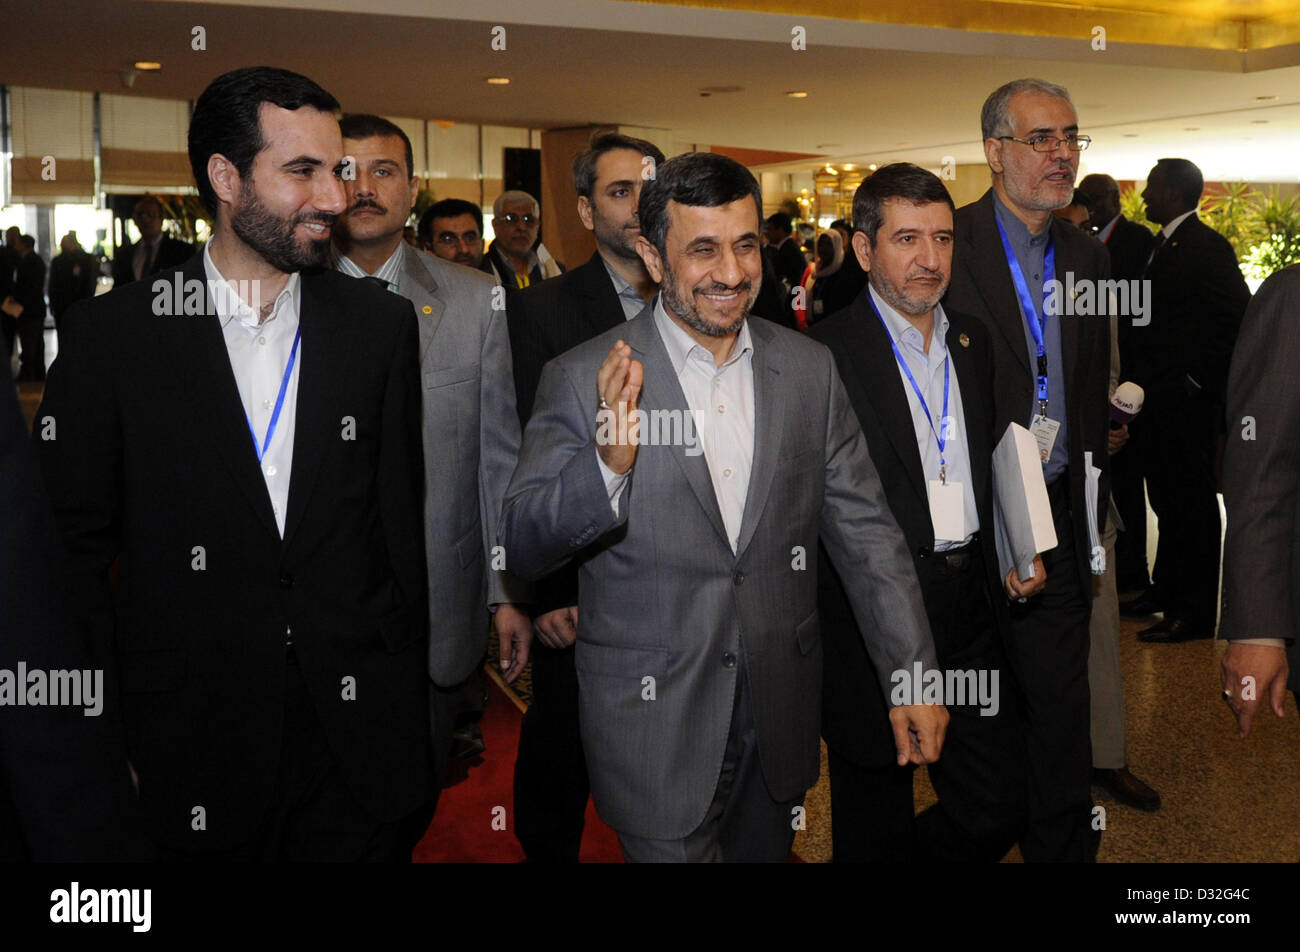 Feb. 7, 2013 - Cairo, Cairo, Egypt - Iranian President Mahmoud Ahmadinejad (C) attends the 12th summit of the Organisation of Islamic Cooperation on February 7, 2013 in Cairo. The 12th summit of the Organisation of Islamic Cooperation opened in Cairo, with Syria's civil war and the battle against Islamist militants in Mali topping the agenda. The meeting gathers the leaders of 26 of the OIC's 57 states, including the presidents of Iran and Turkey  (Credit Image: © Ahmed Asad/APA Images/ZUMAPRESS.com) Stock Photo